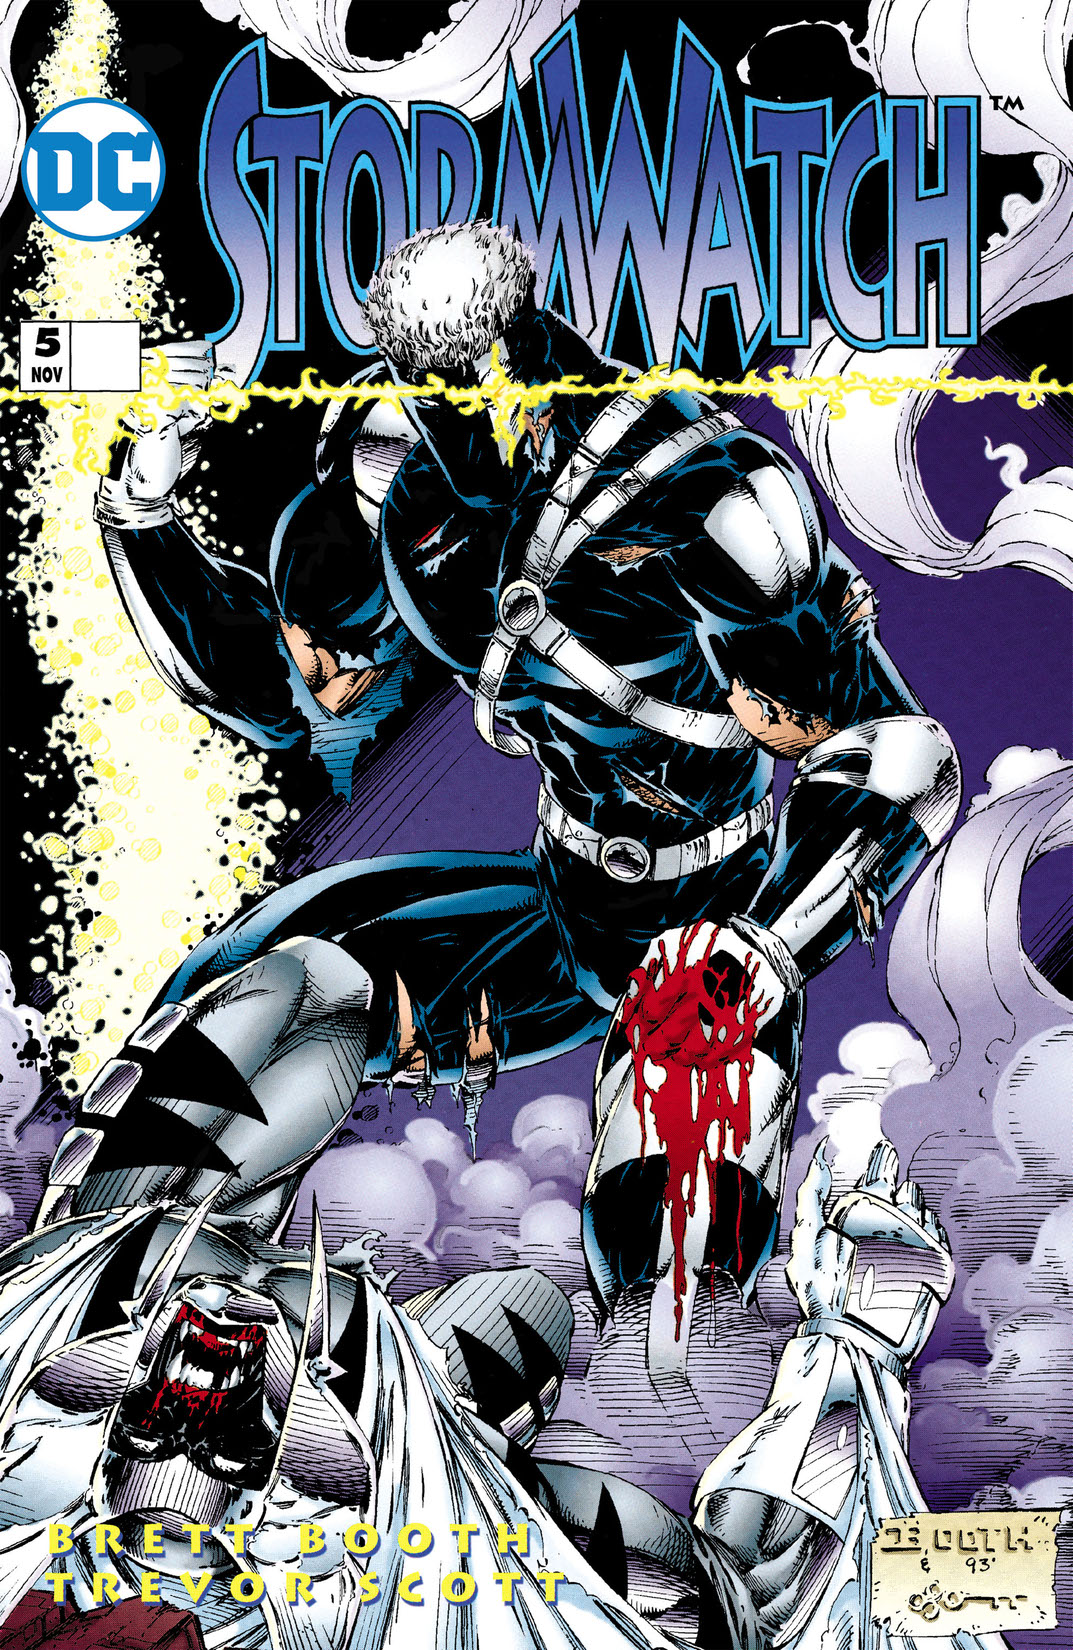 Stormwatch (1993-1997) #5 preview images